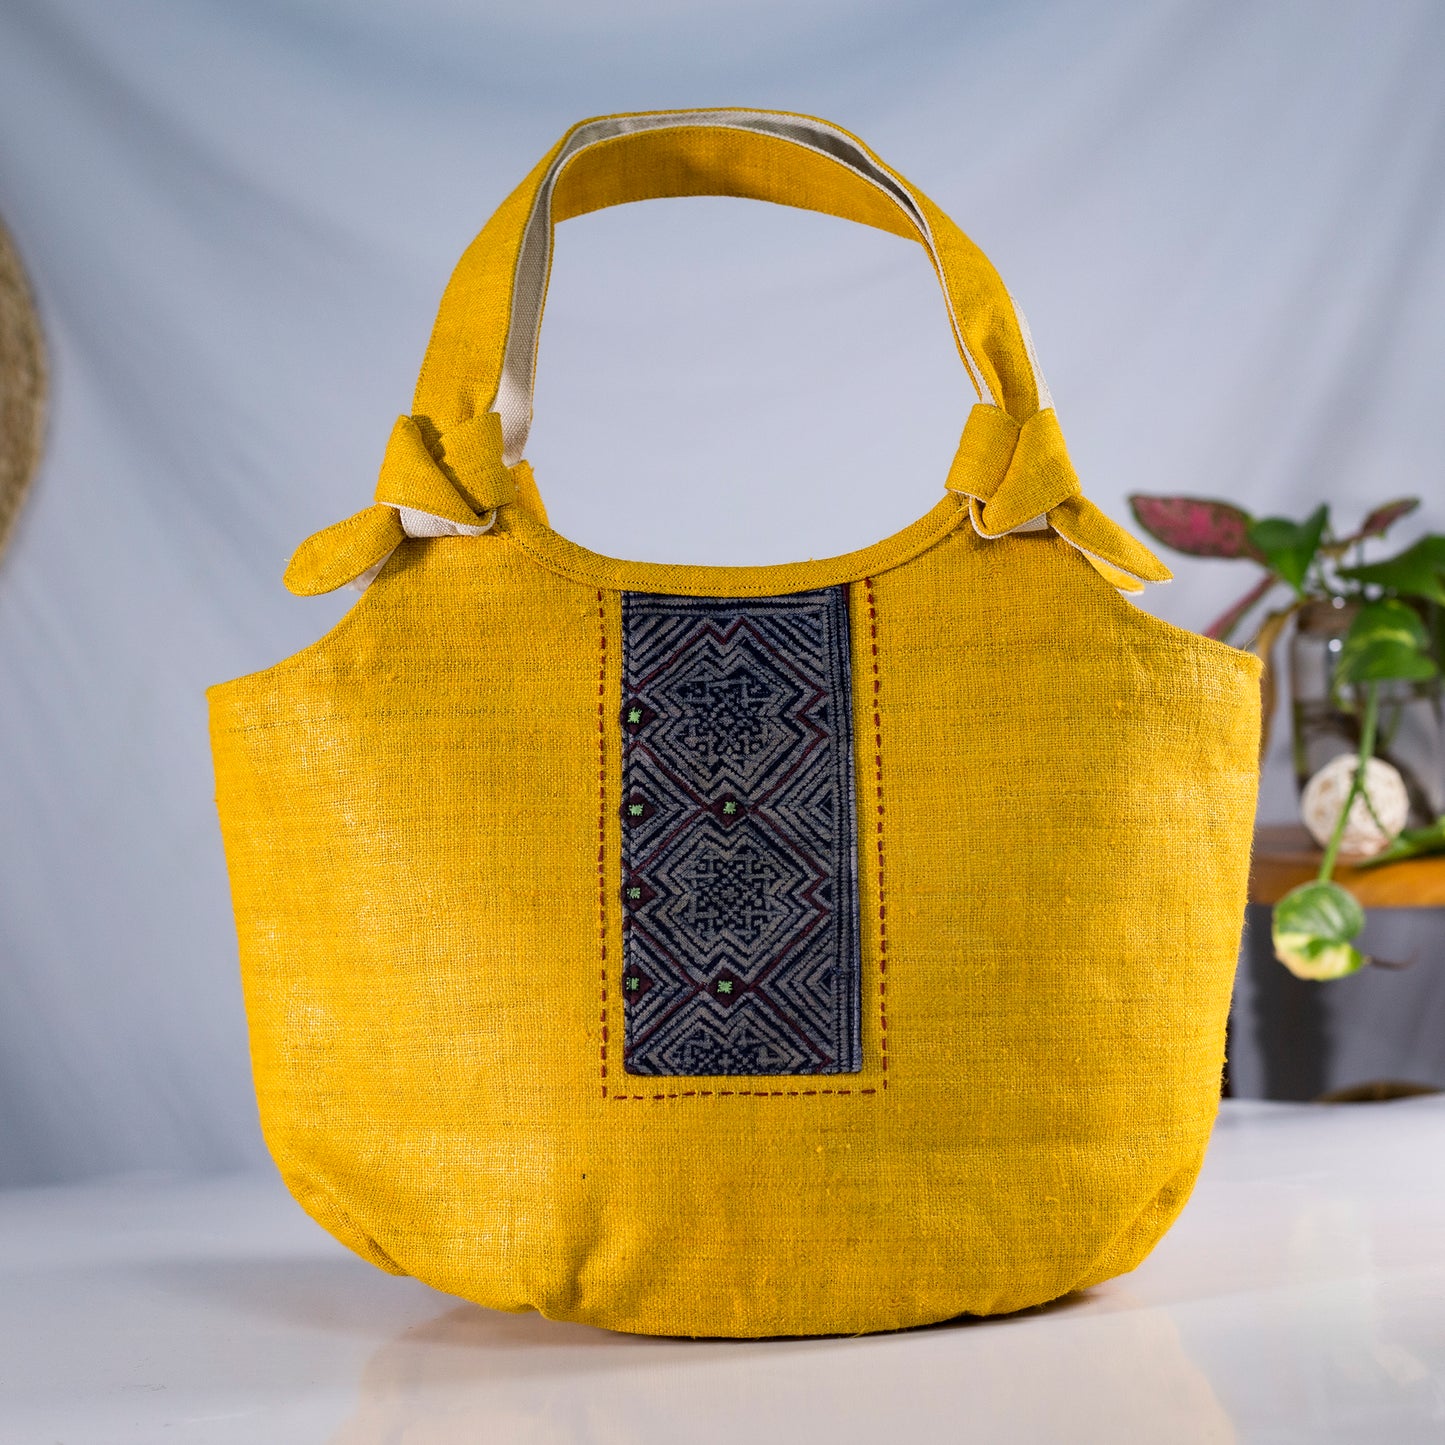 Bunny ear handbag, natural hemp in YELLOW with vintage patch